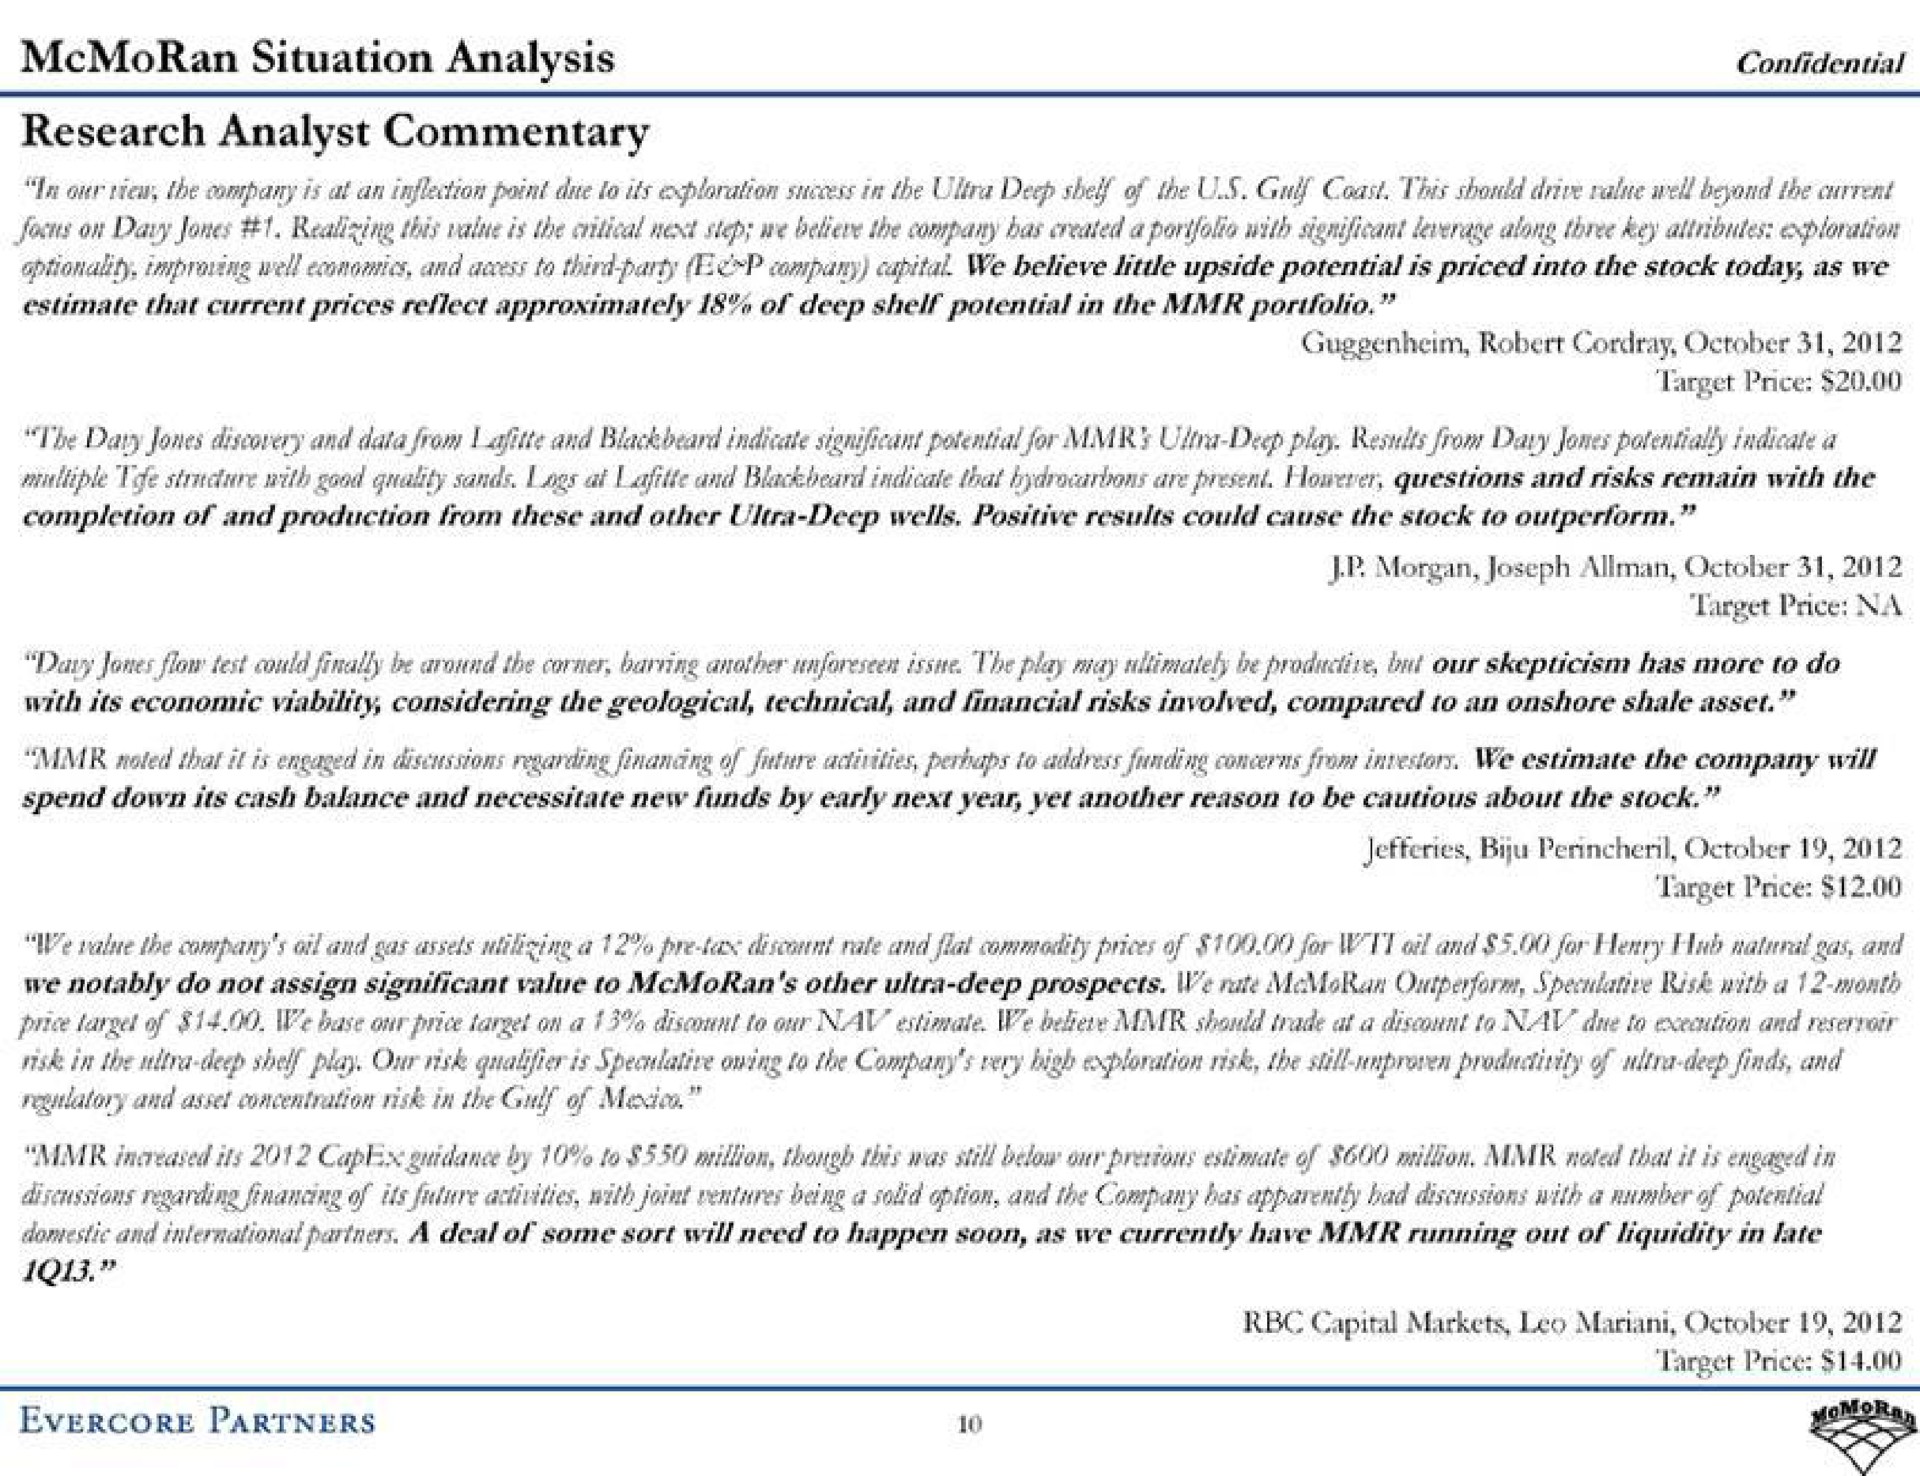 situation analysis confidential research analyst commentary | Evercore